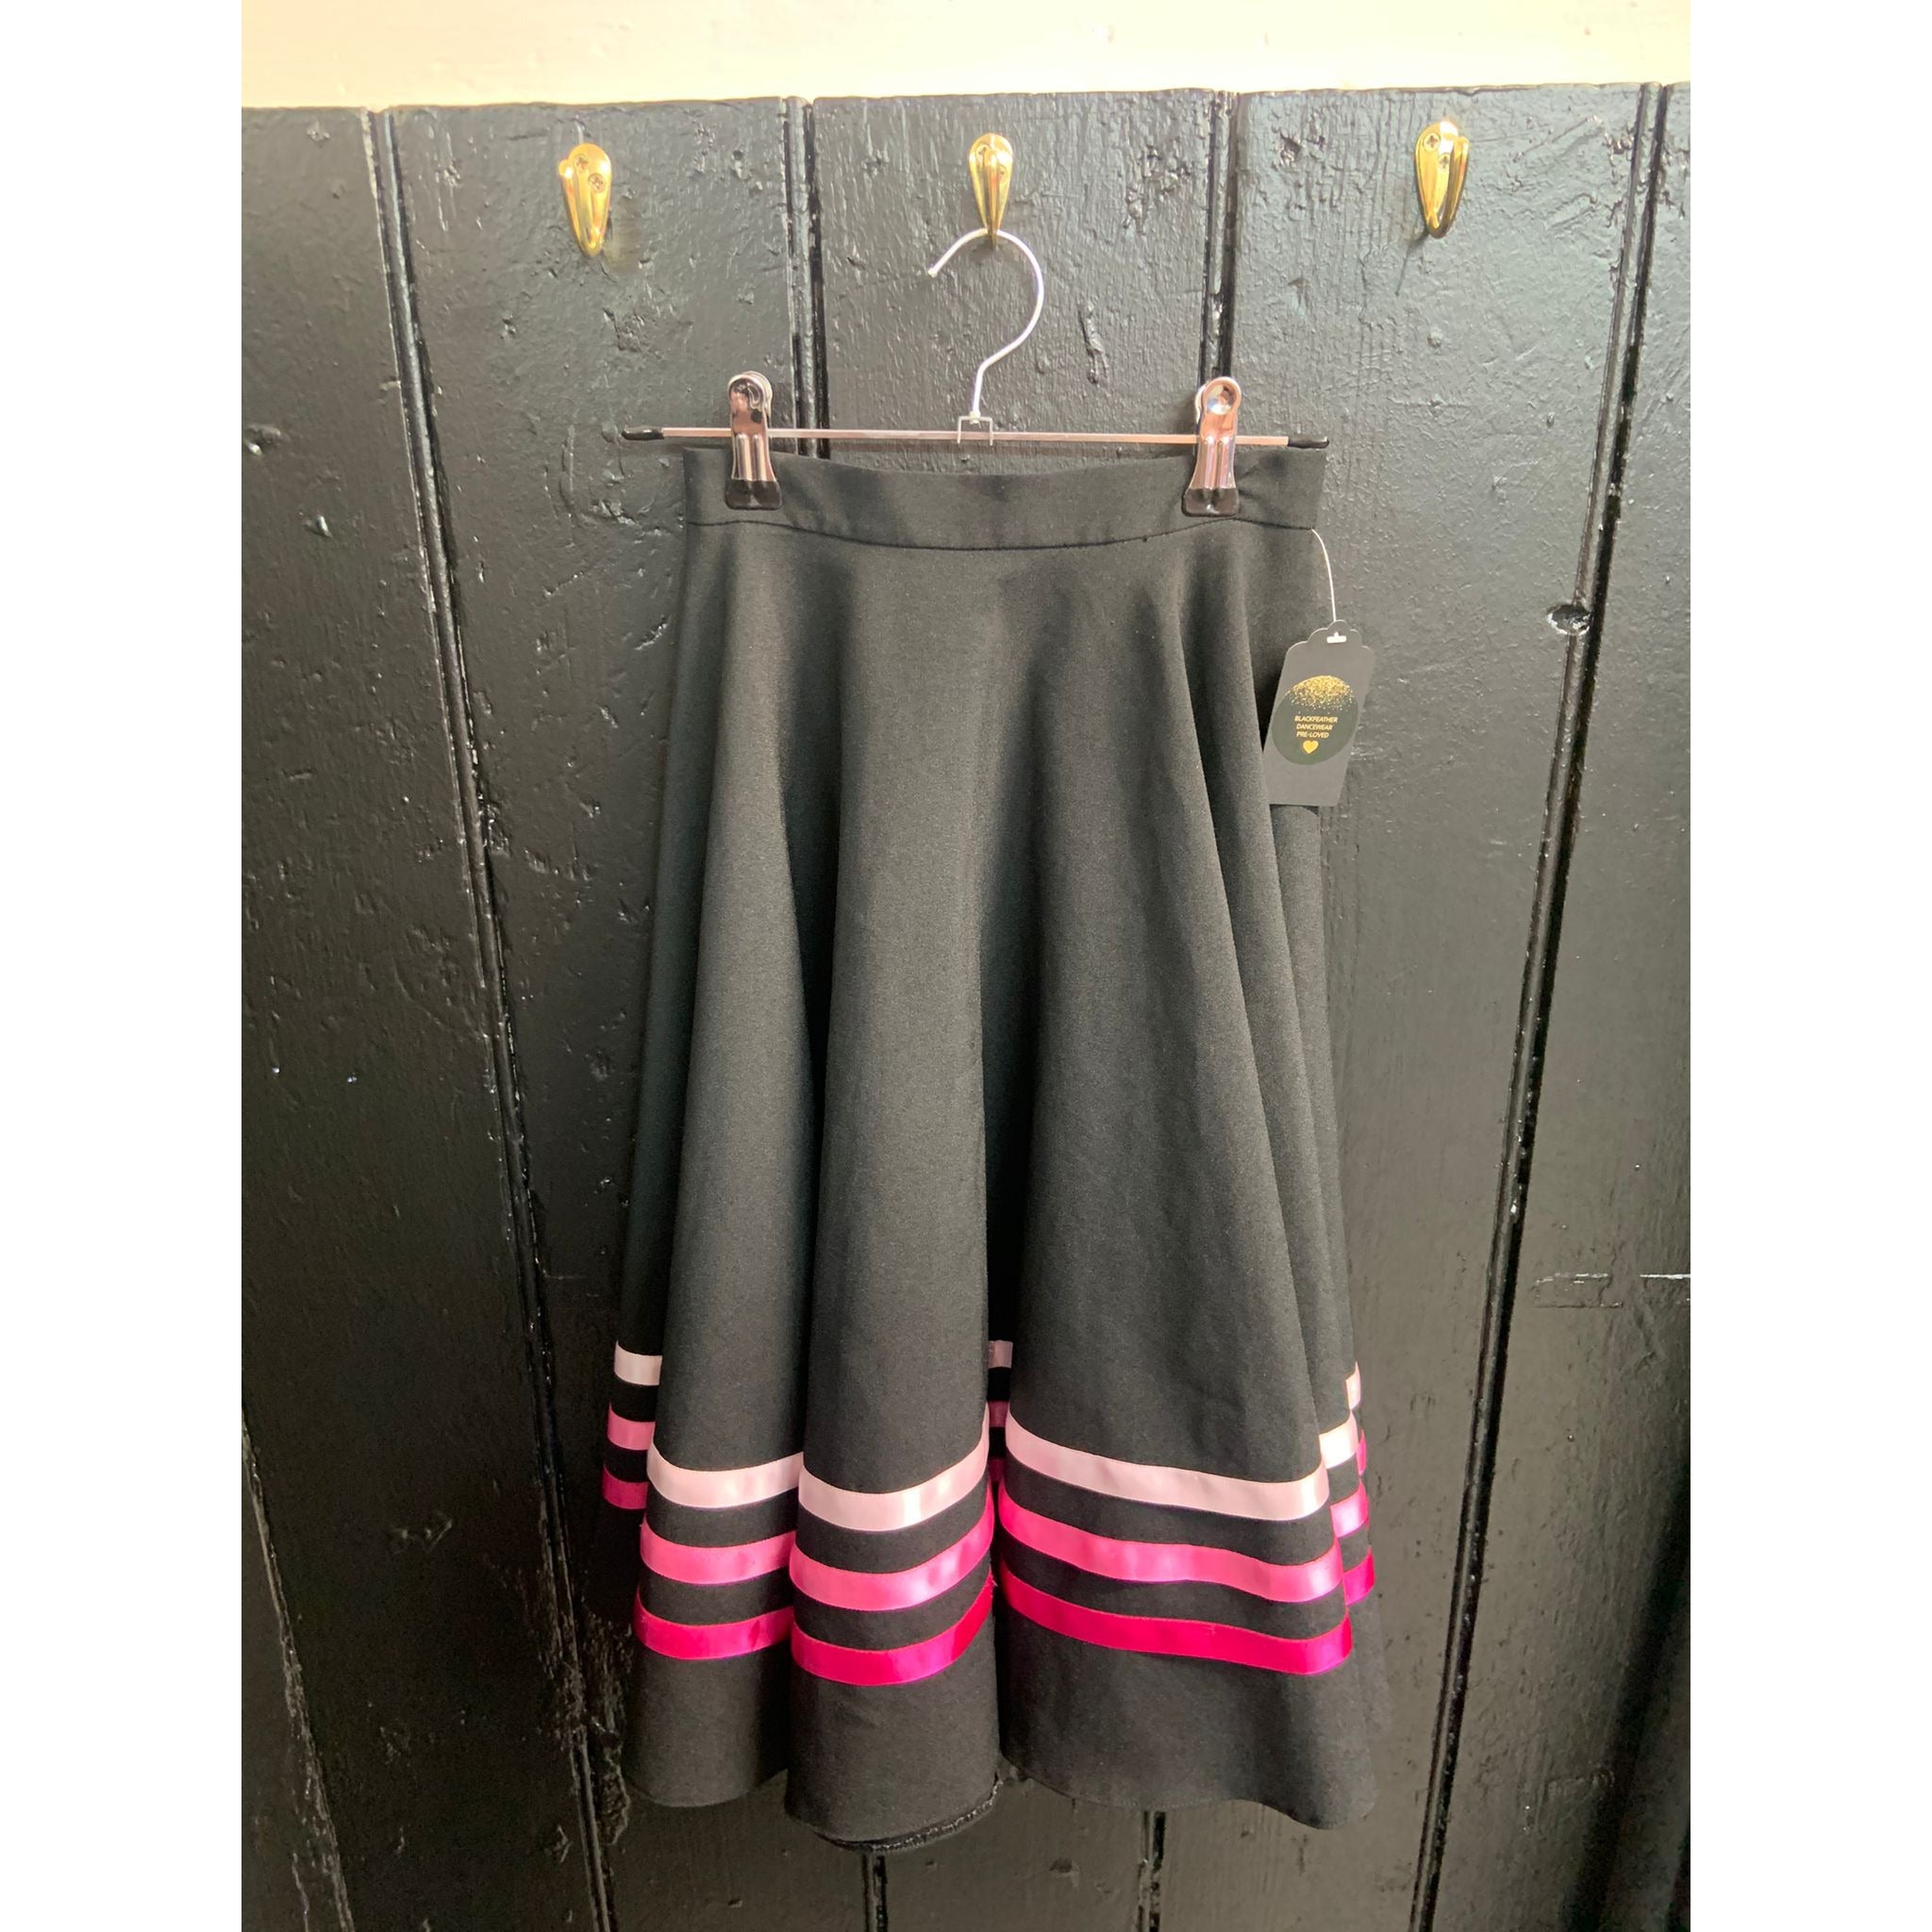 PRE-LOVED - Black Character Skirt with Pink Ribbon